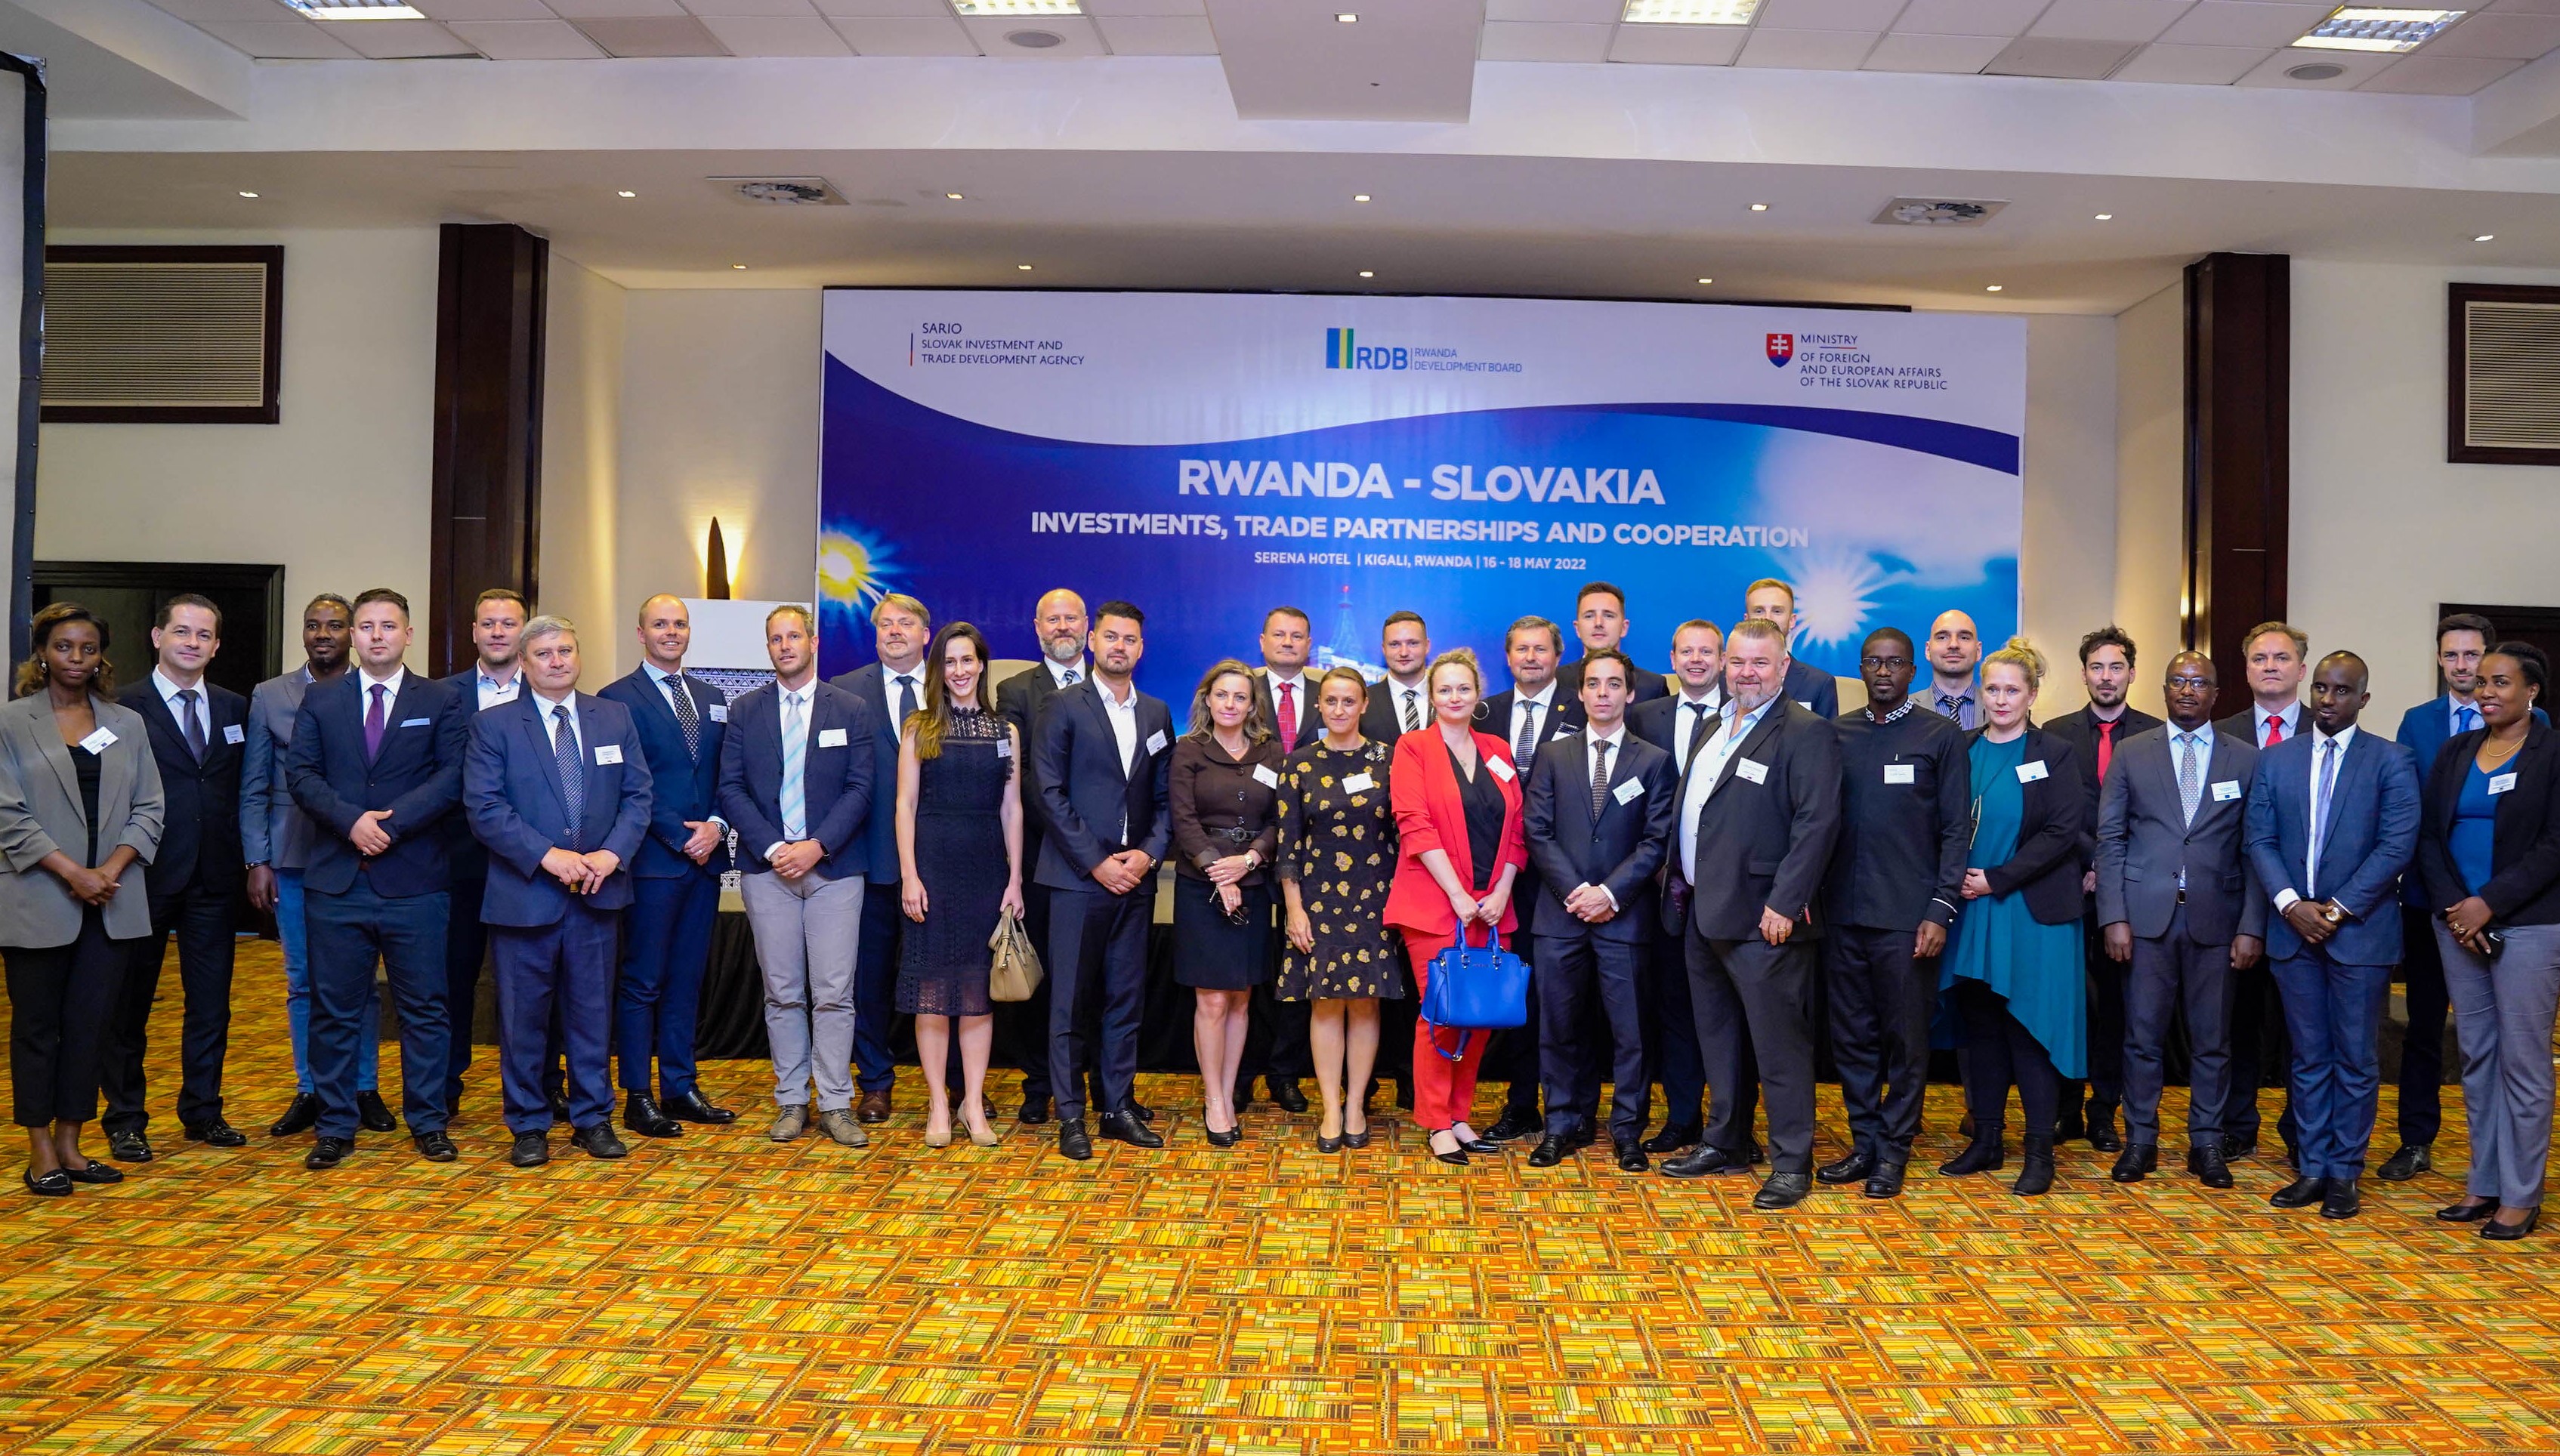 A total of 18 Slovakian business executives are on a trade mission in Rwanda to explore different investment opportunities and partnerships in the country. Photo by Dan Nsengiyumva